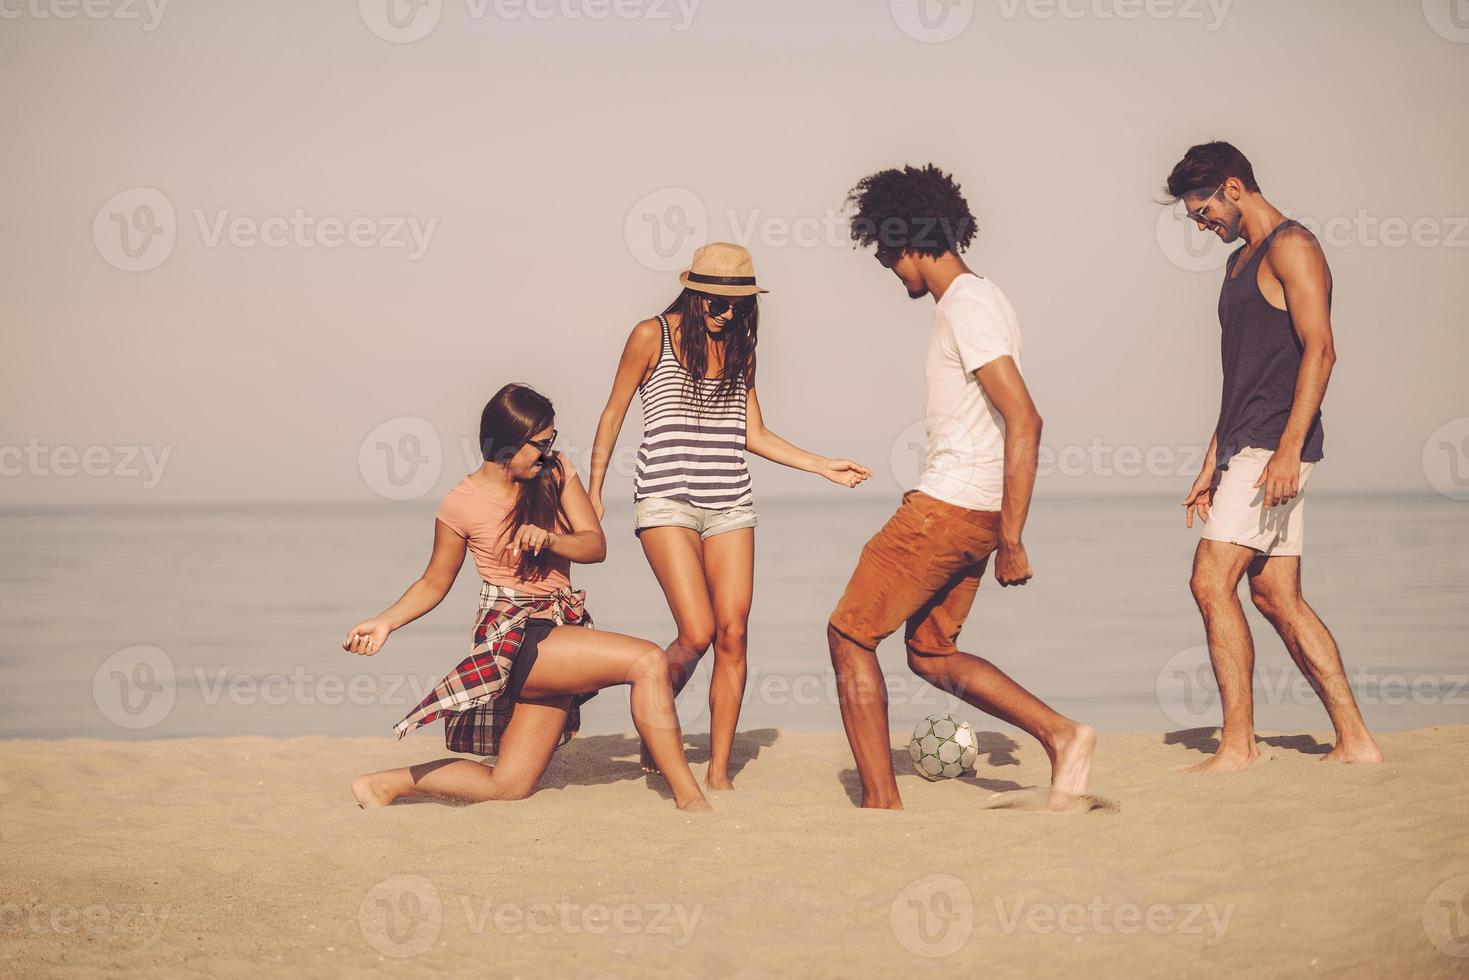 Beach ball with friends. Group of cheerful young people playing with soccer ball on the beach with sea in the background photo